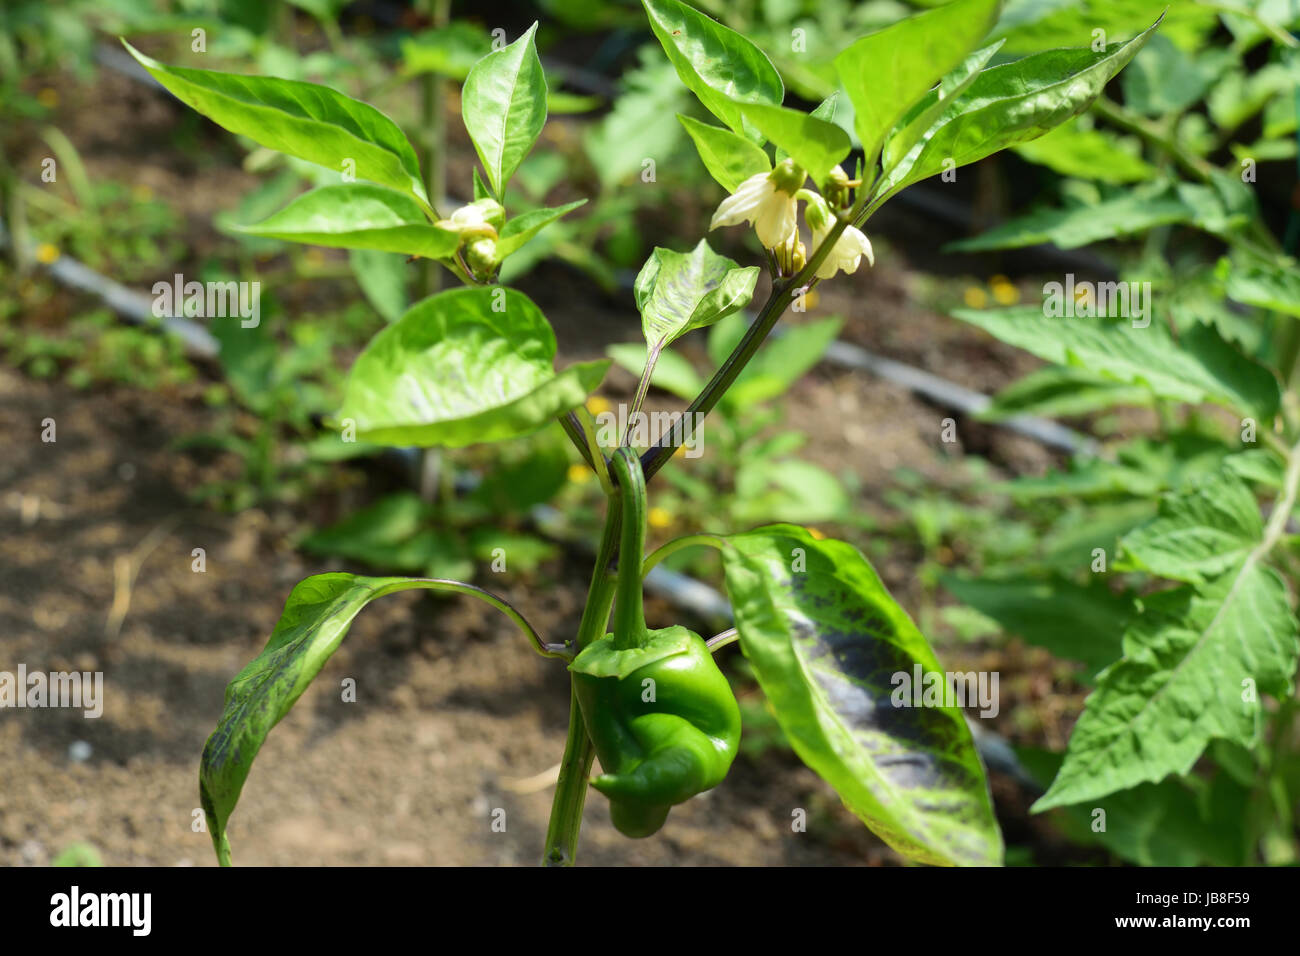 Capsicum annuum is cultivated for a wide variety of shapes and sizes of peppers, both mild and hot: bell peppers, jalapeños, chili and cayenne pepper. Stock Photo